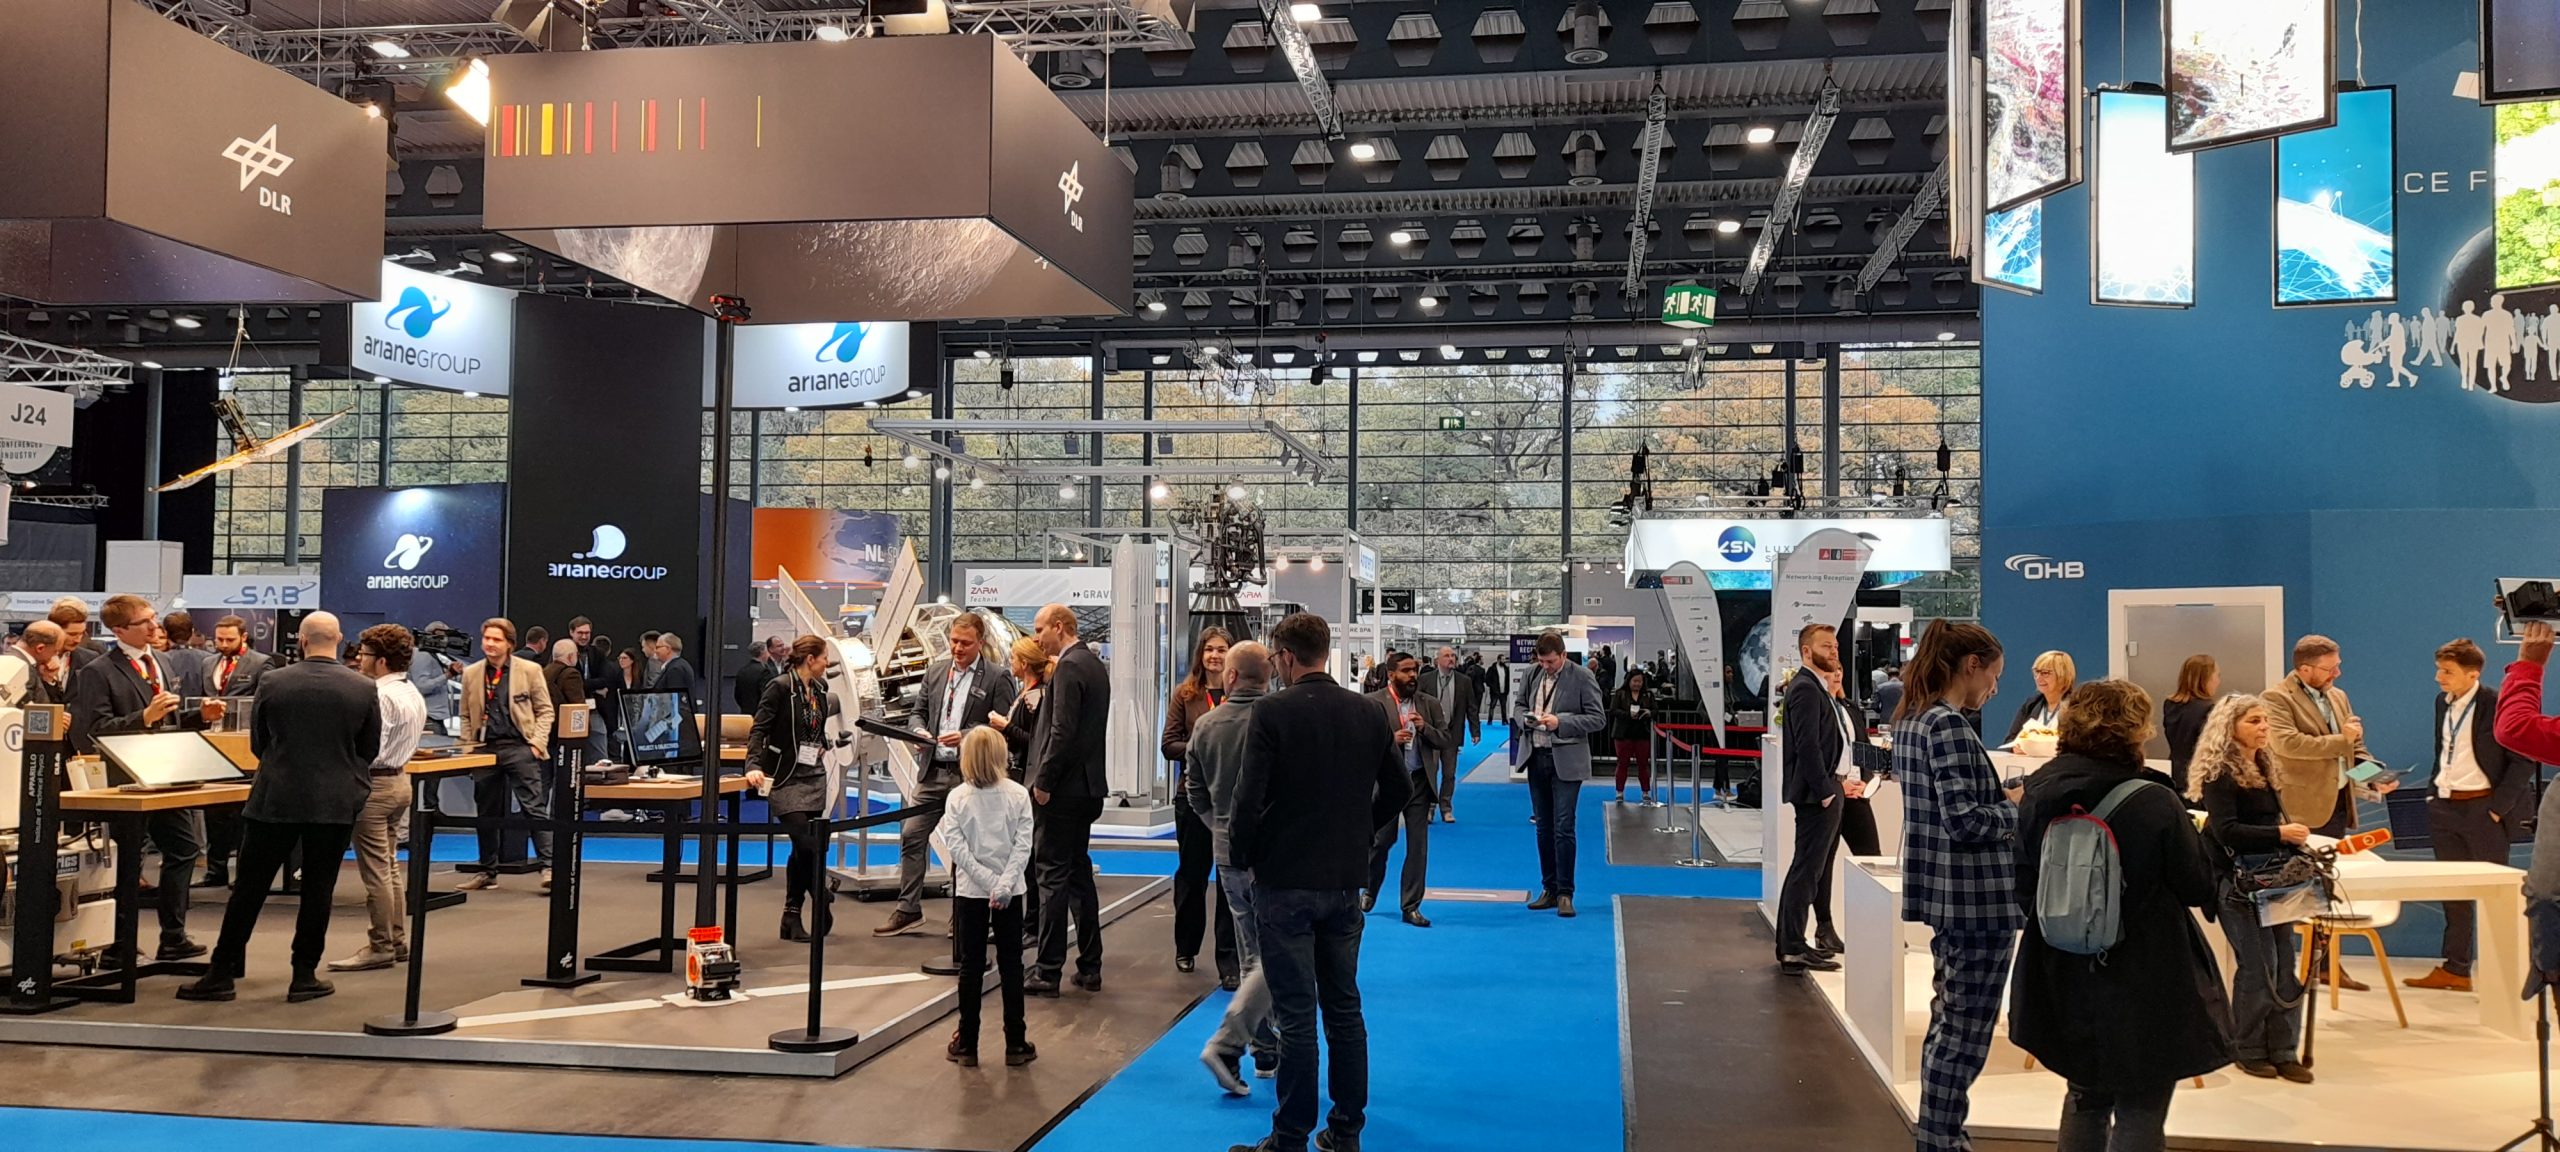 Space Tech Expo Europe – Day 1